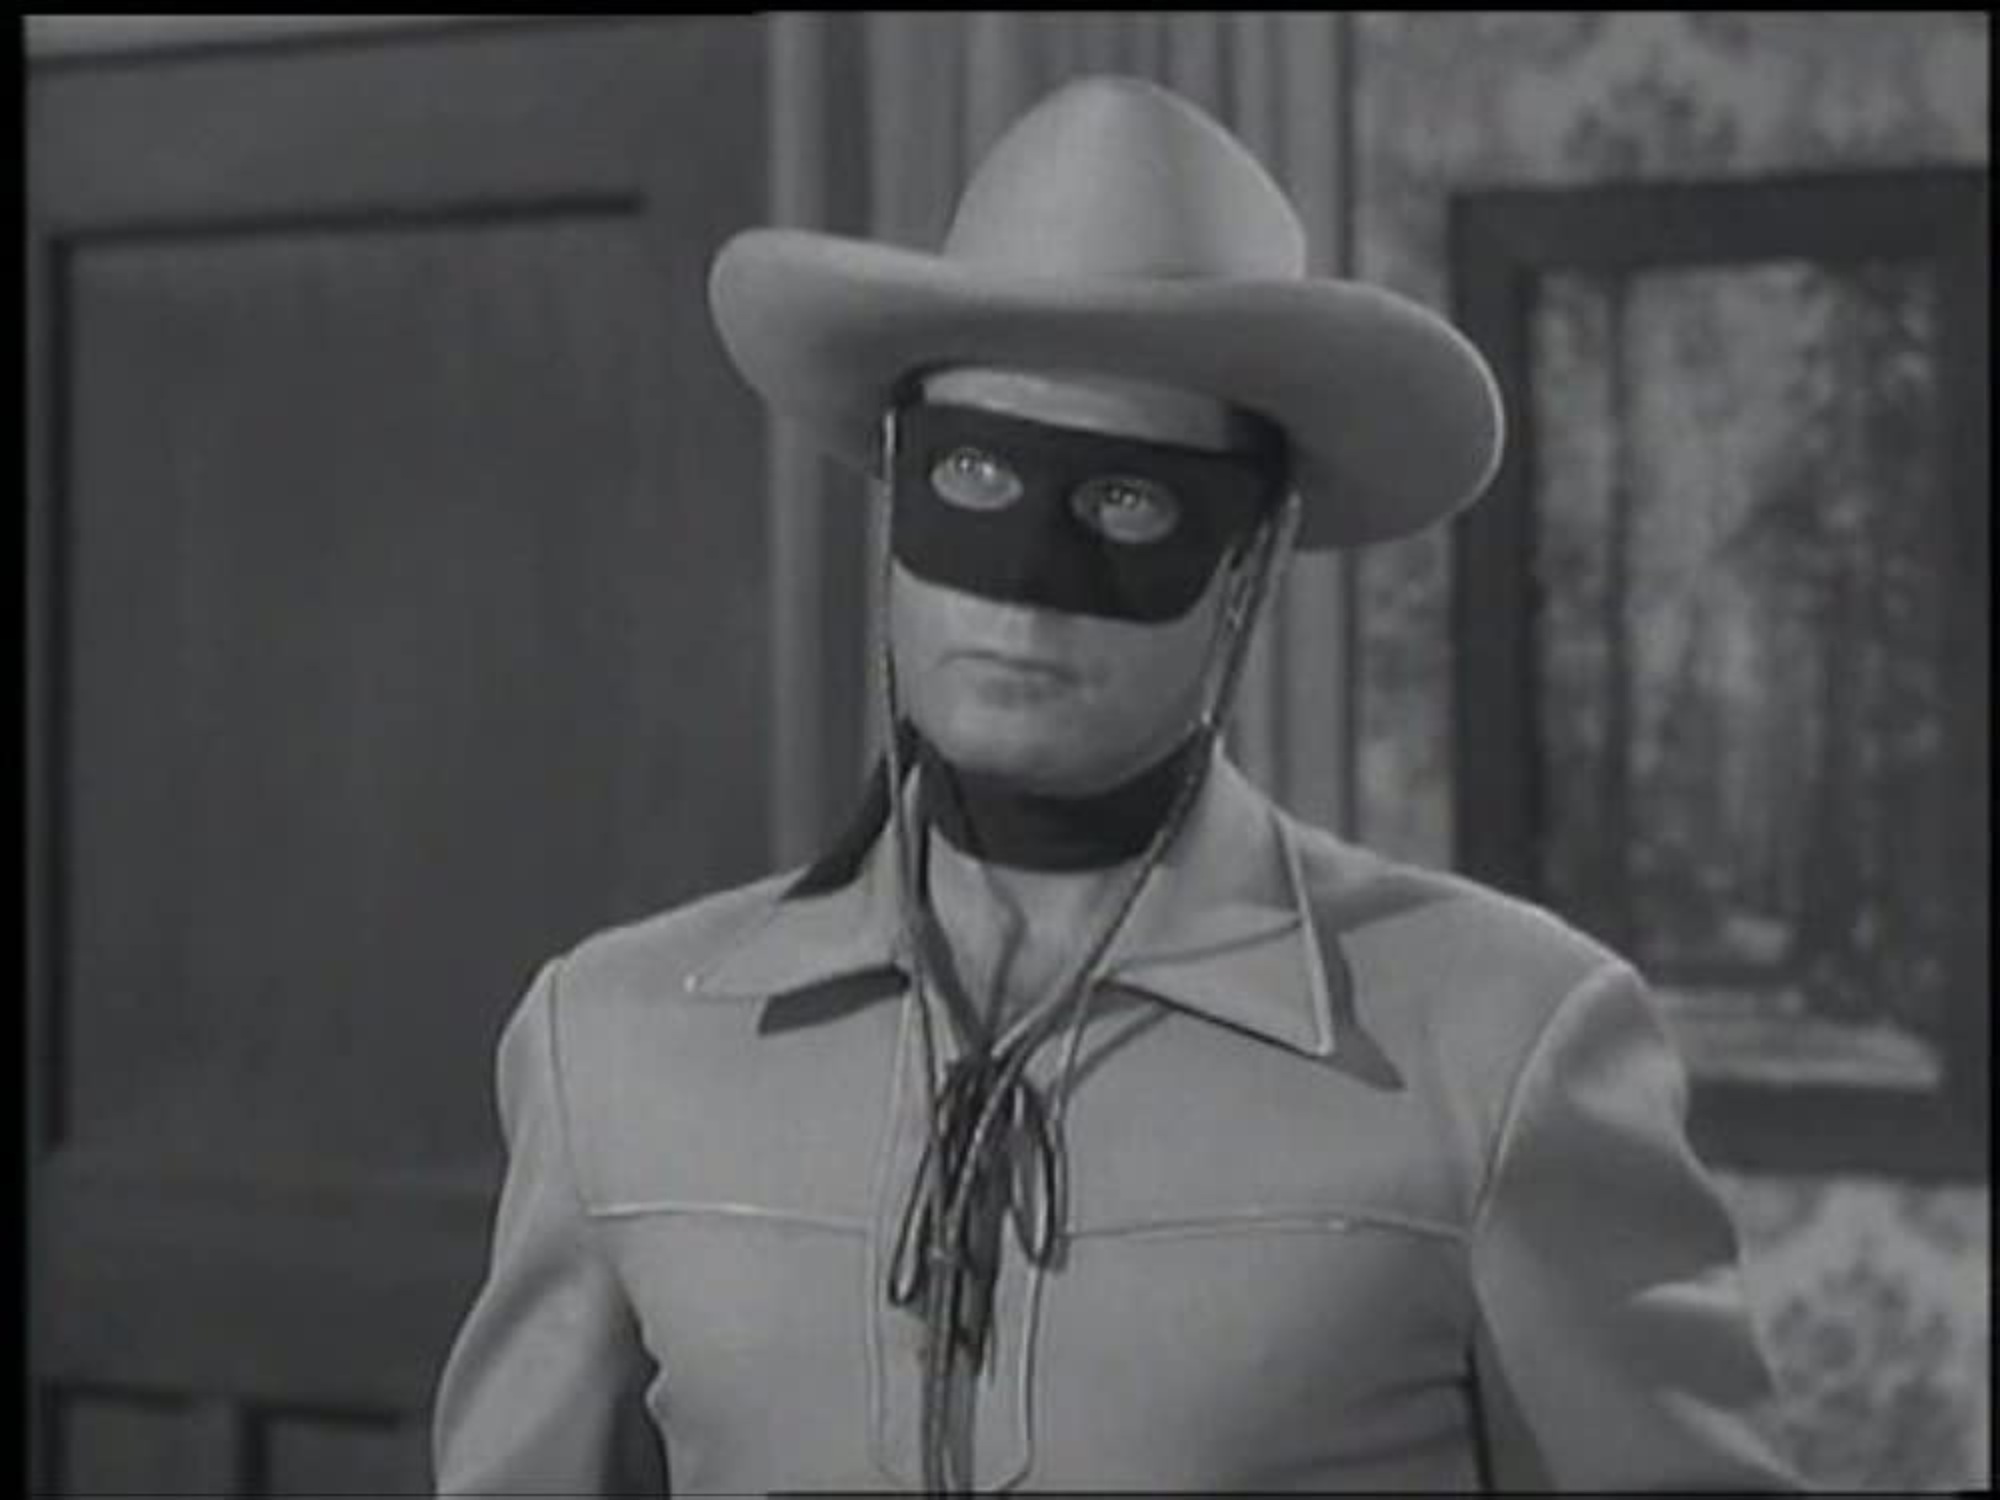 'The Lone Ranger' Clayton Moore as the Lone Ranger in season 4 episodes. He's wearing a black mask, cowboy hat, and Western costume.